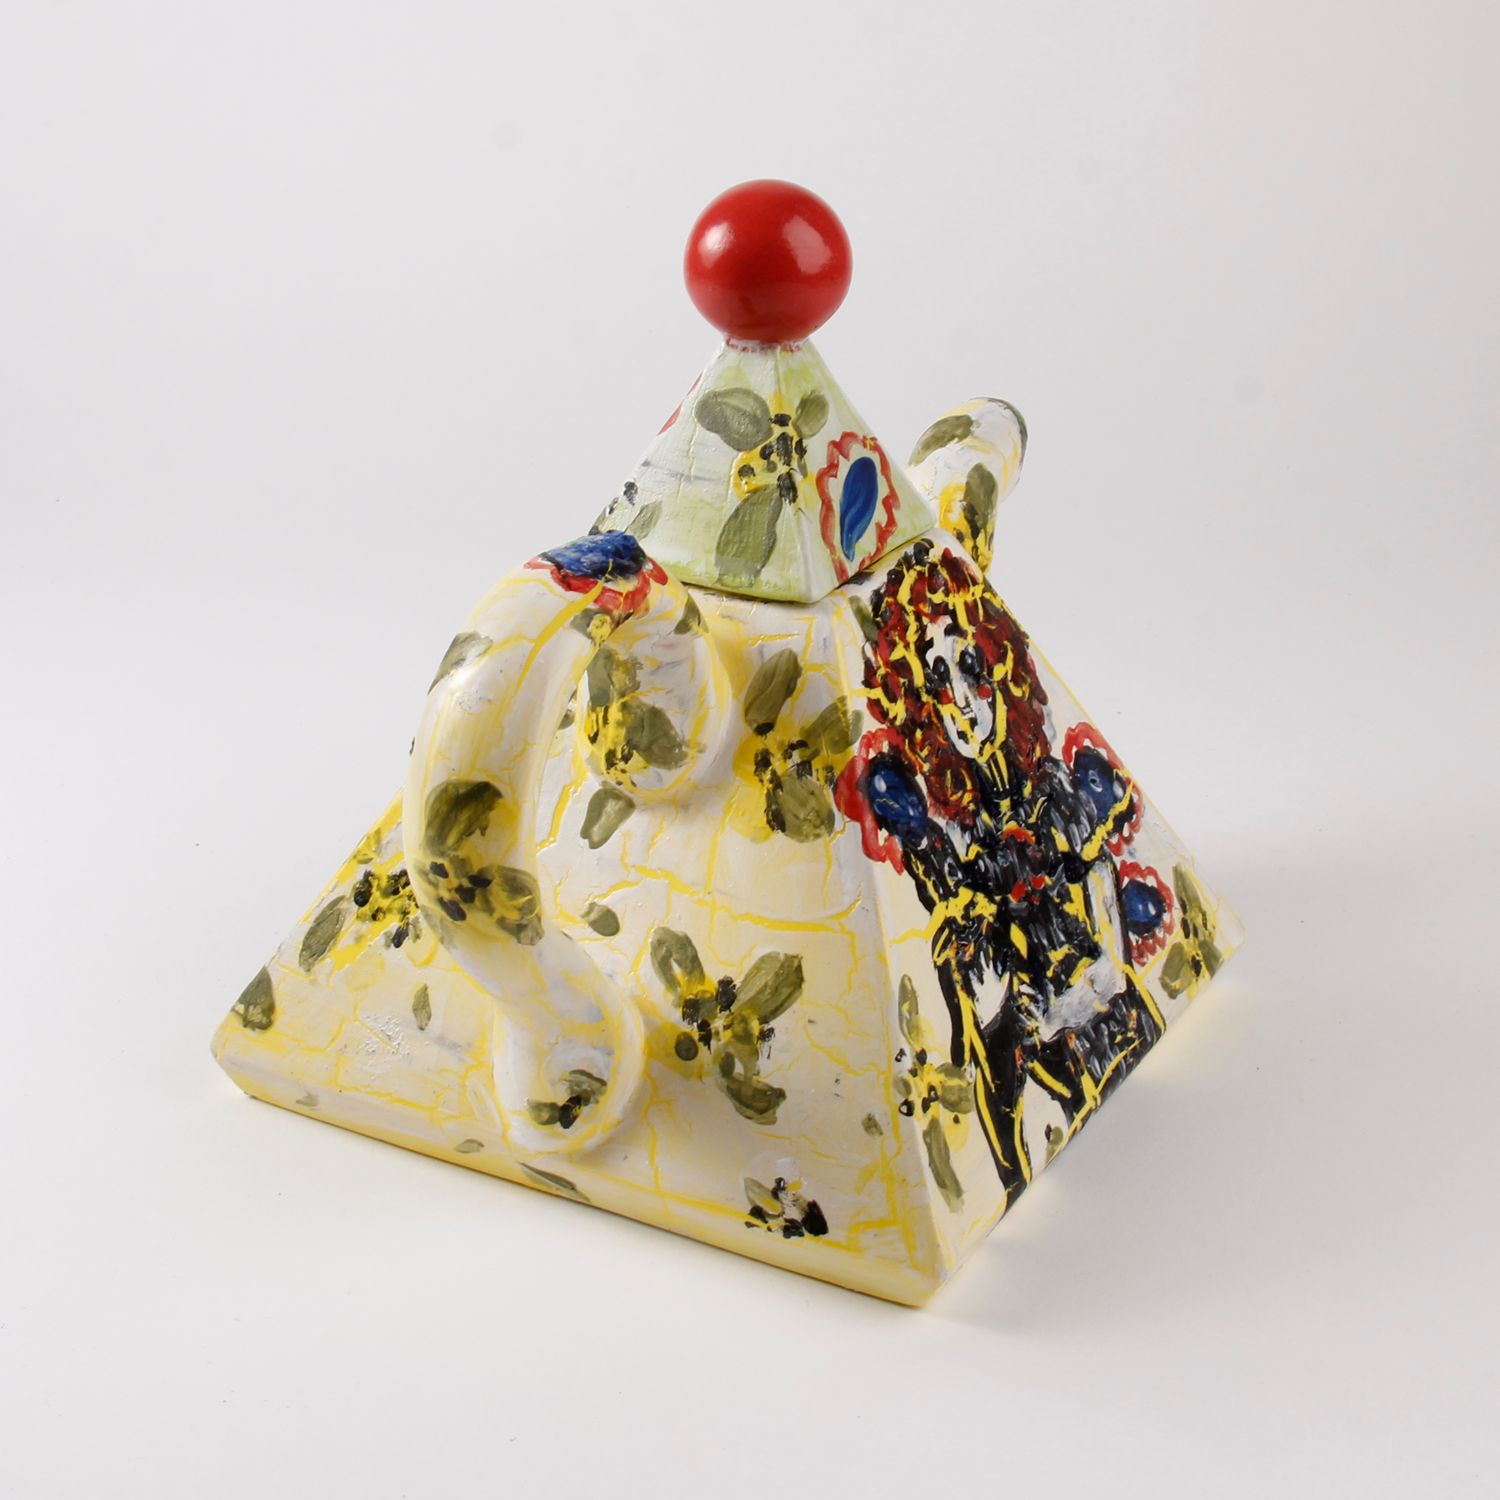 Patricia Lazar: Triangle Teapot Product Image 2 of 4